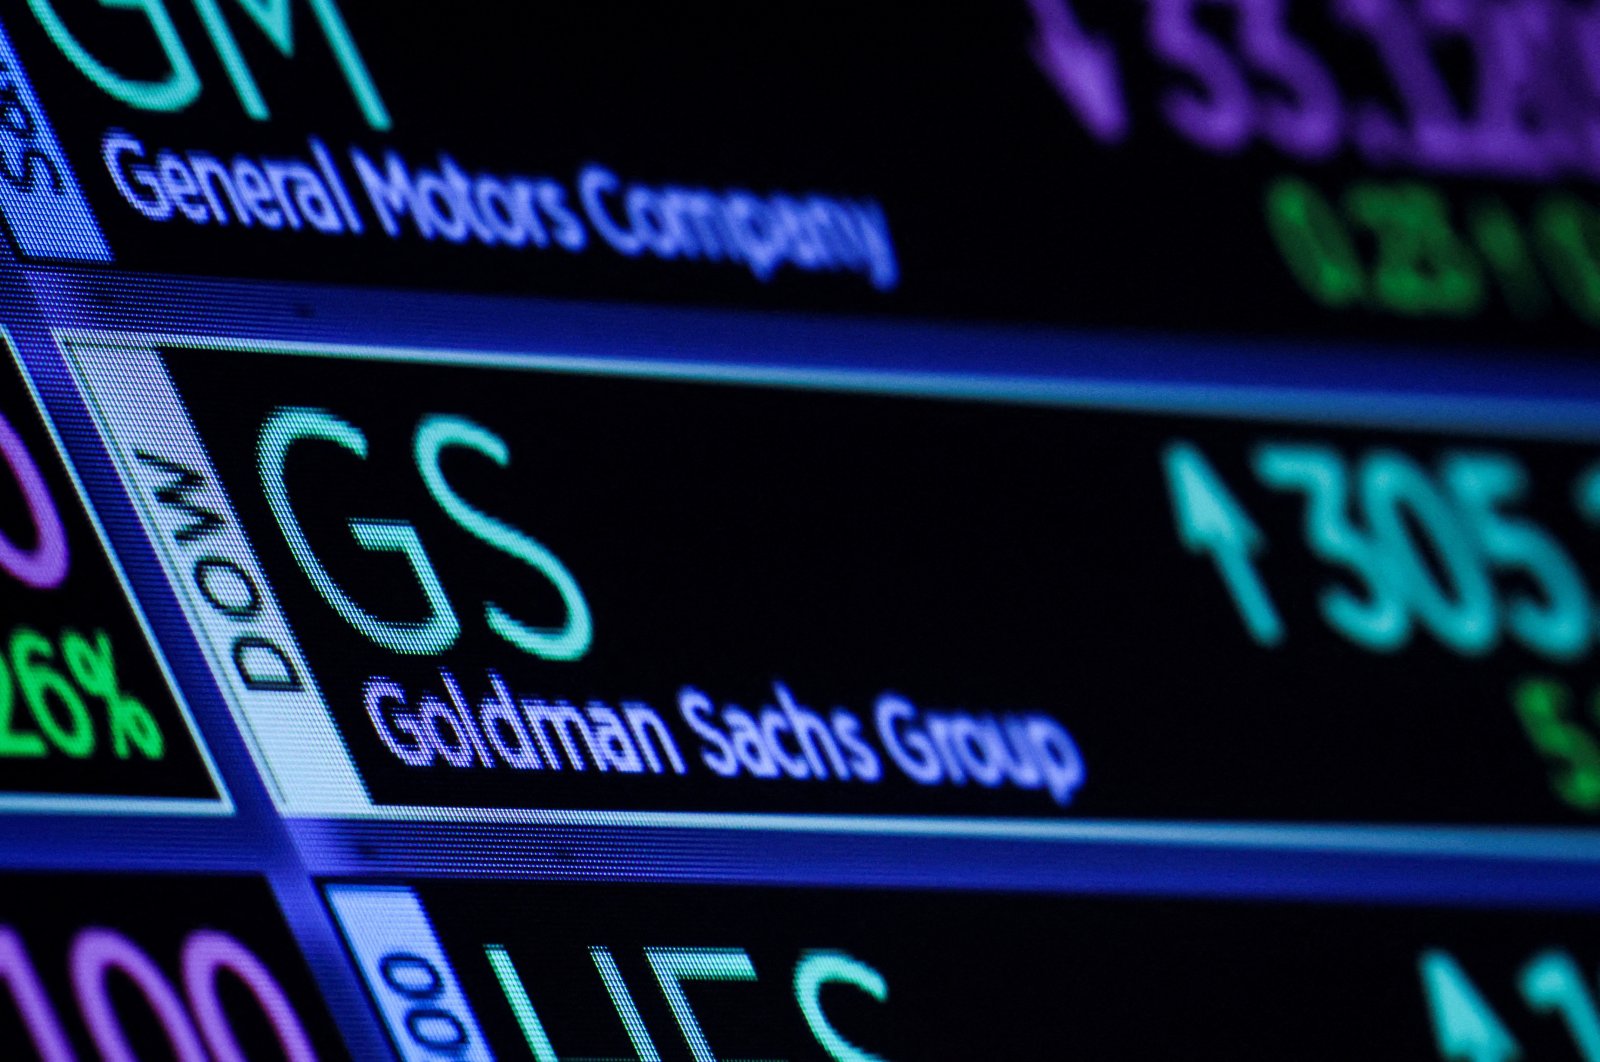 Goldman Sachs expects ‘less robust’ dealmaking in medium term